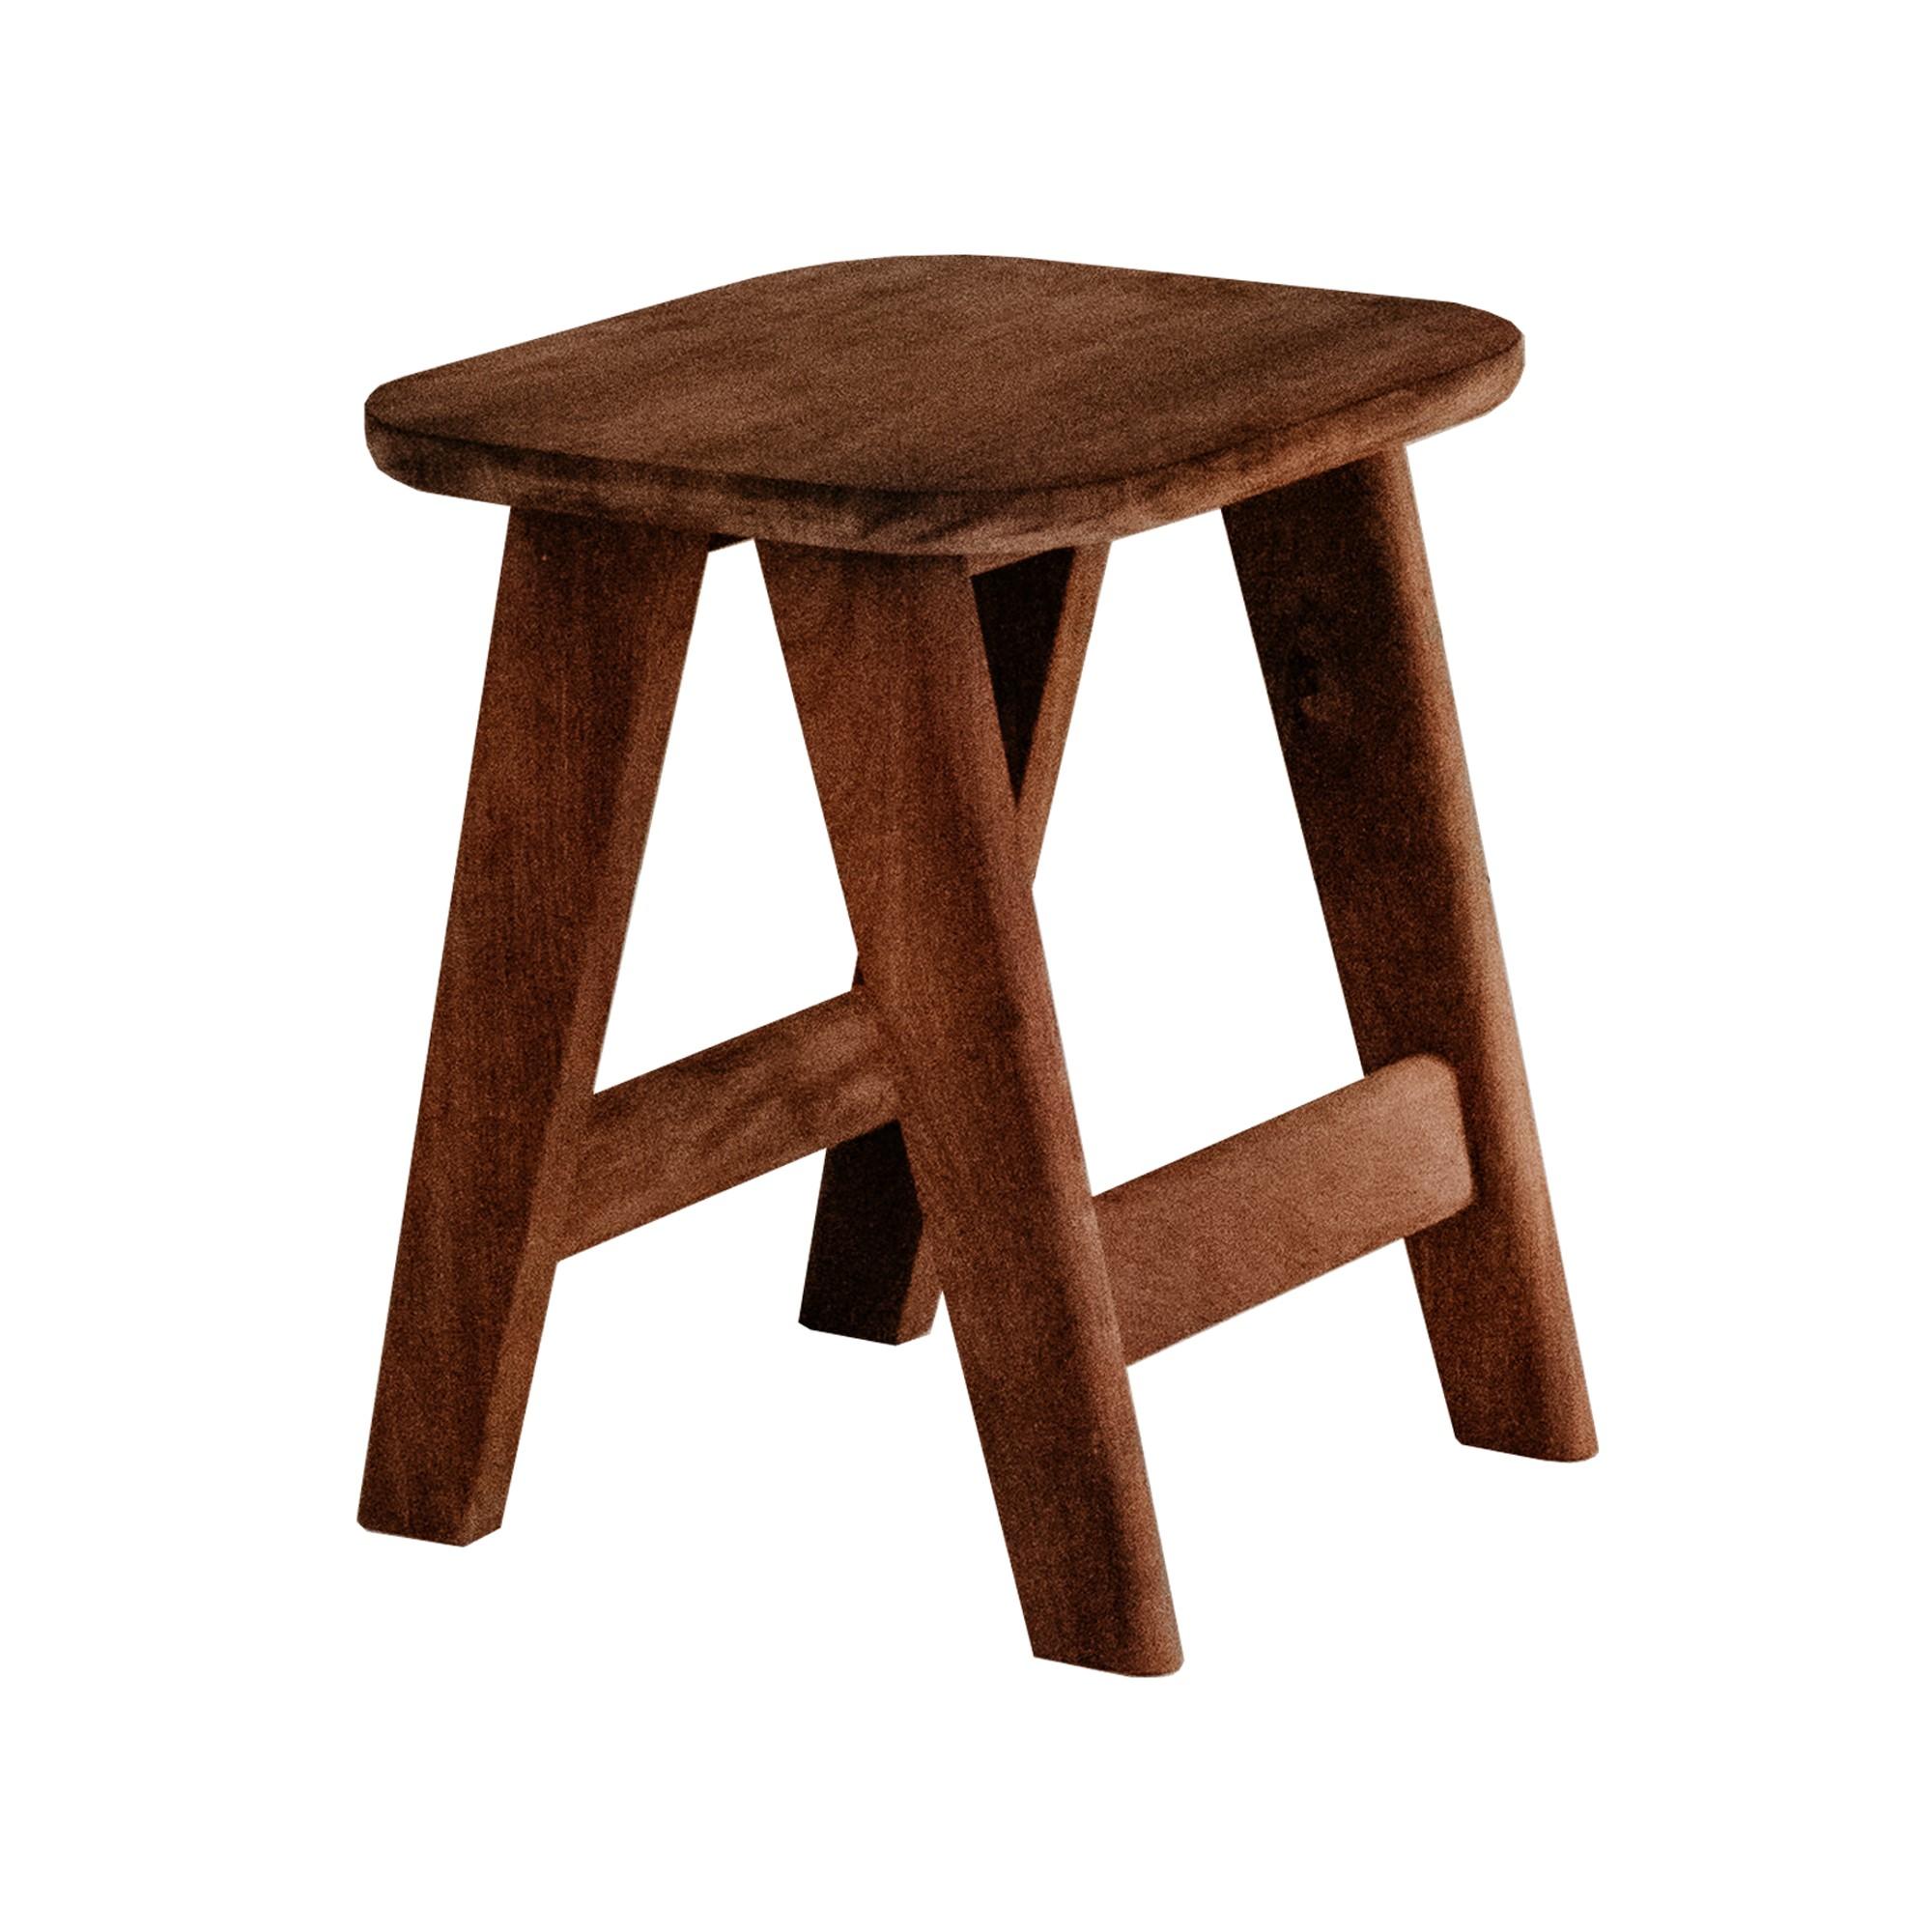 This handcrafted stool made from a richly-grained Iroko was designed and made by Quanström Studio in collaboration with par-avion co. in their shared Norwich, UK workshop. The simple design, with a subtle leg splay base and rounded-edge top gives a